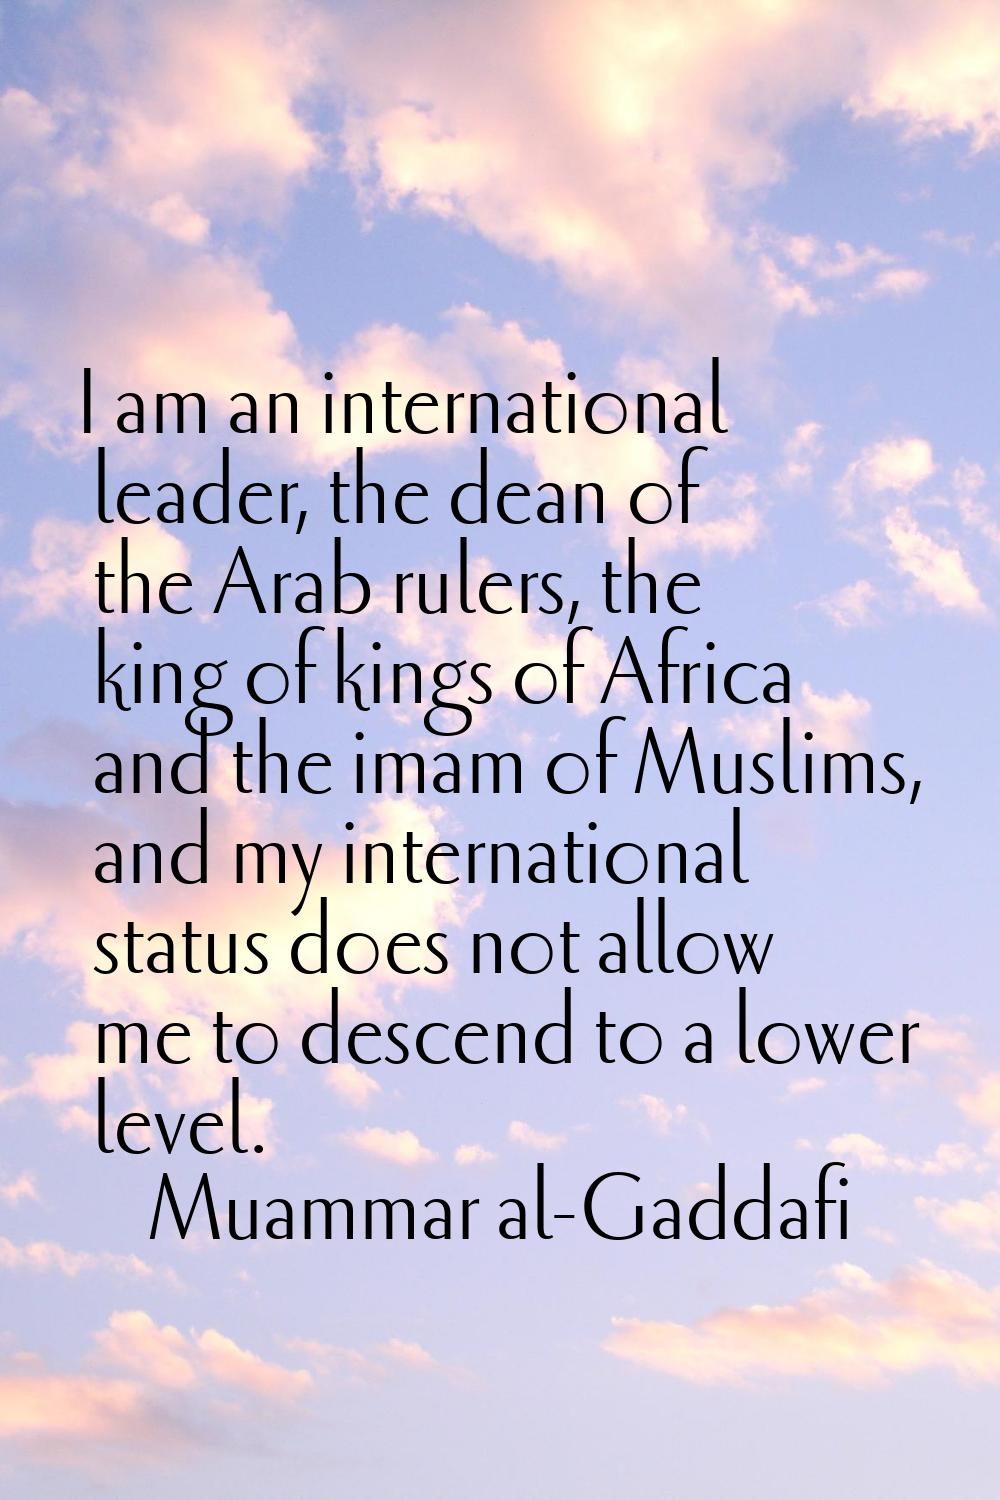 I am an international leader, the dean of the Arab rulers, the king of kings of Africa and the imam